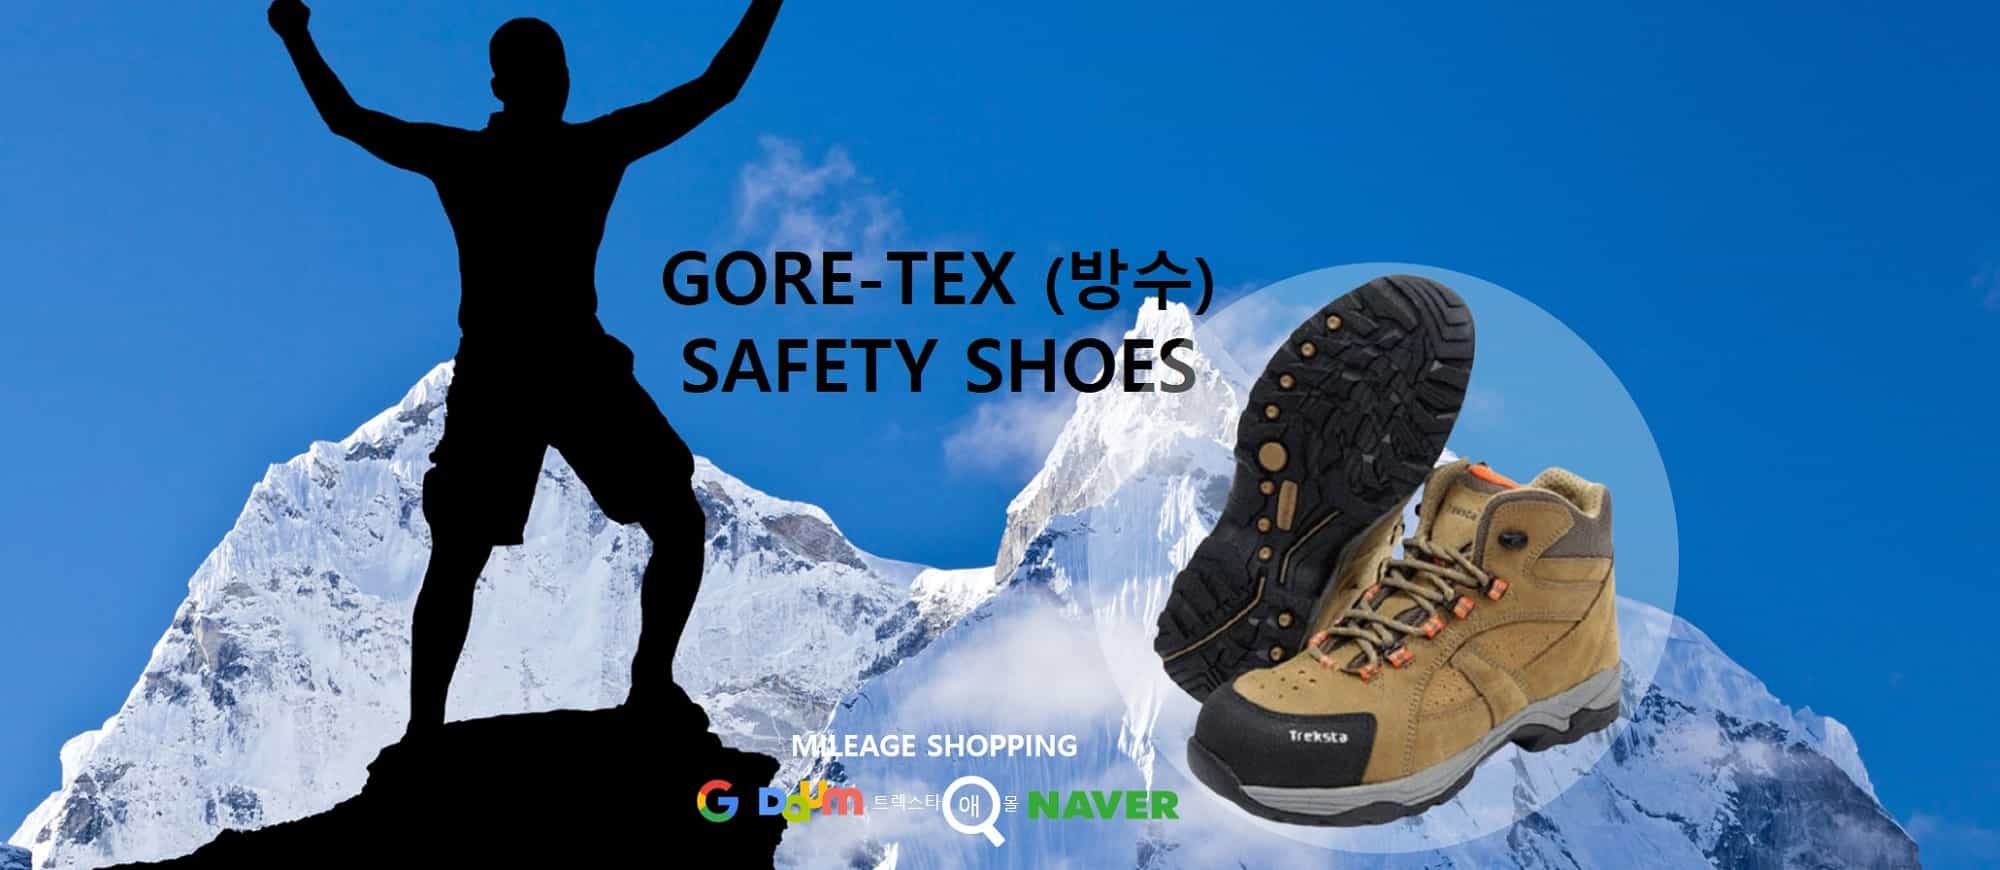 GORE-TEX (방수) SAFETY SHOES